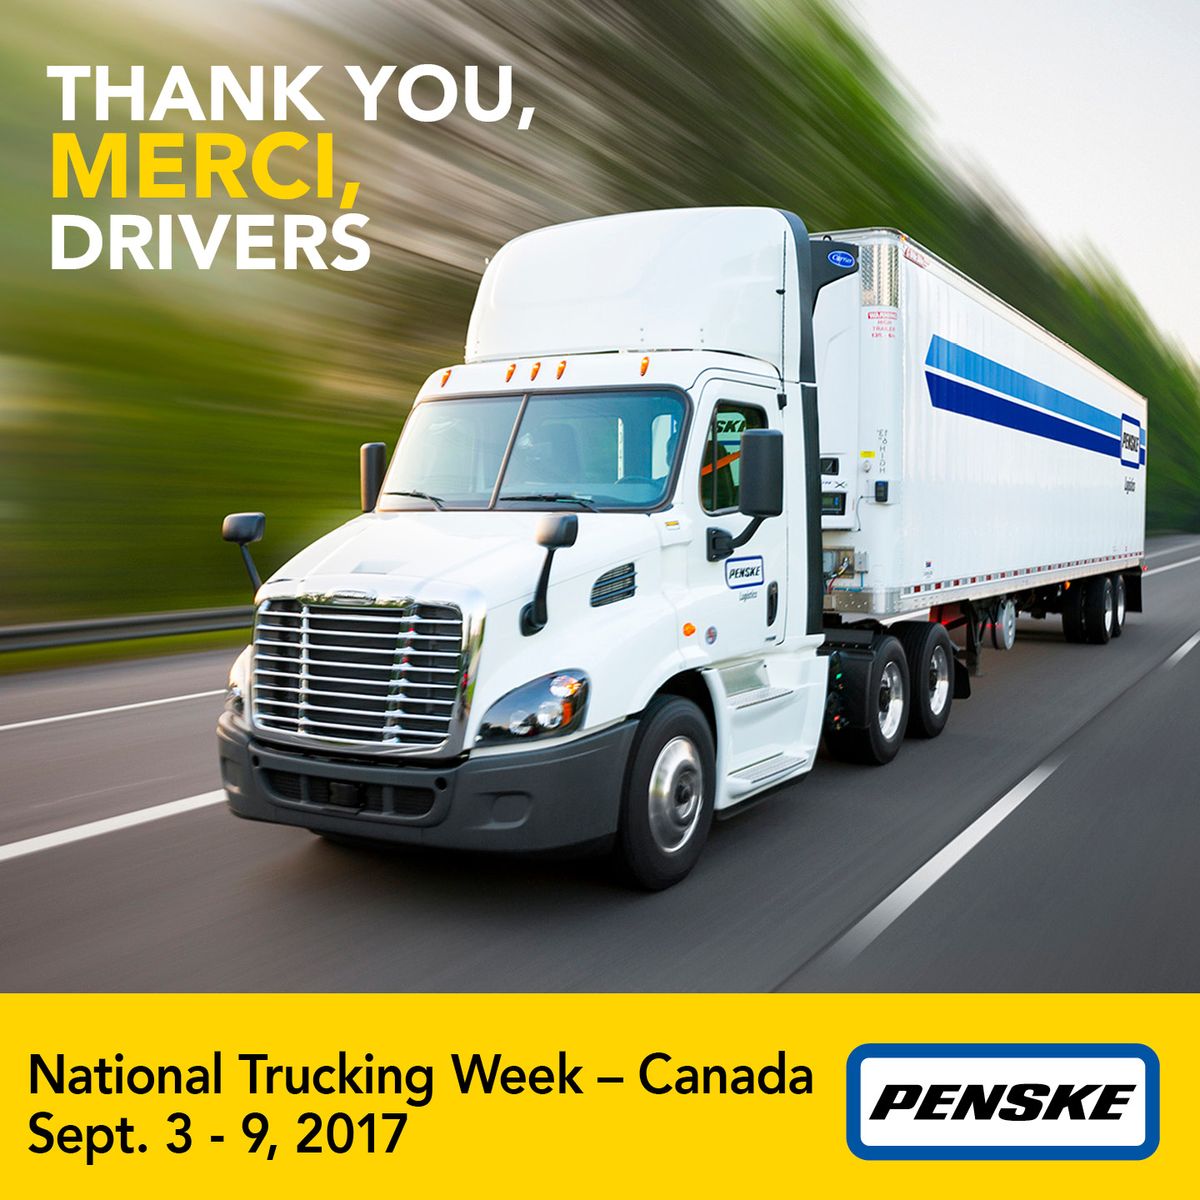 Thanking Truck Drivers for Moving Our World Forward